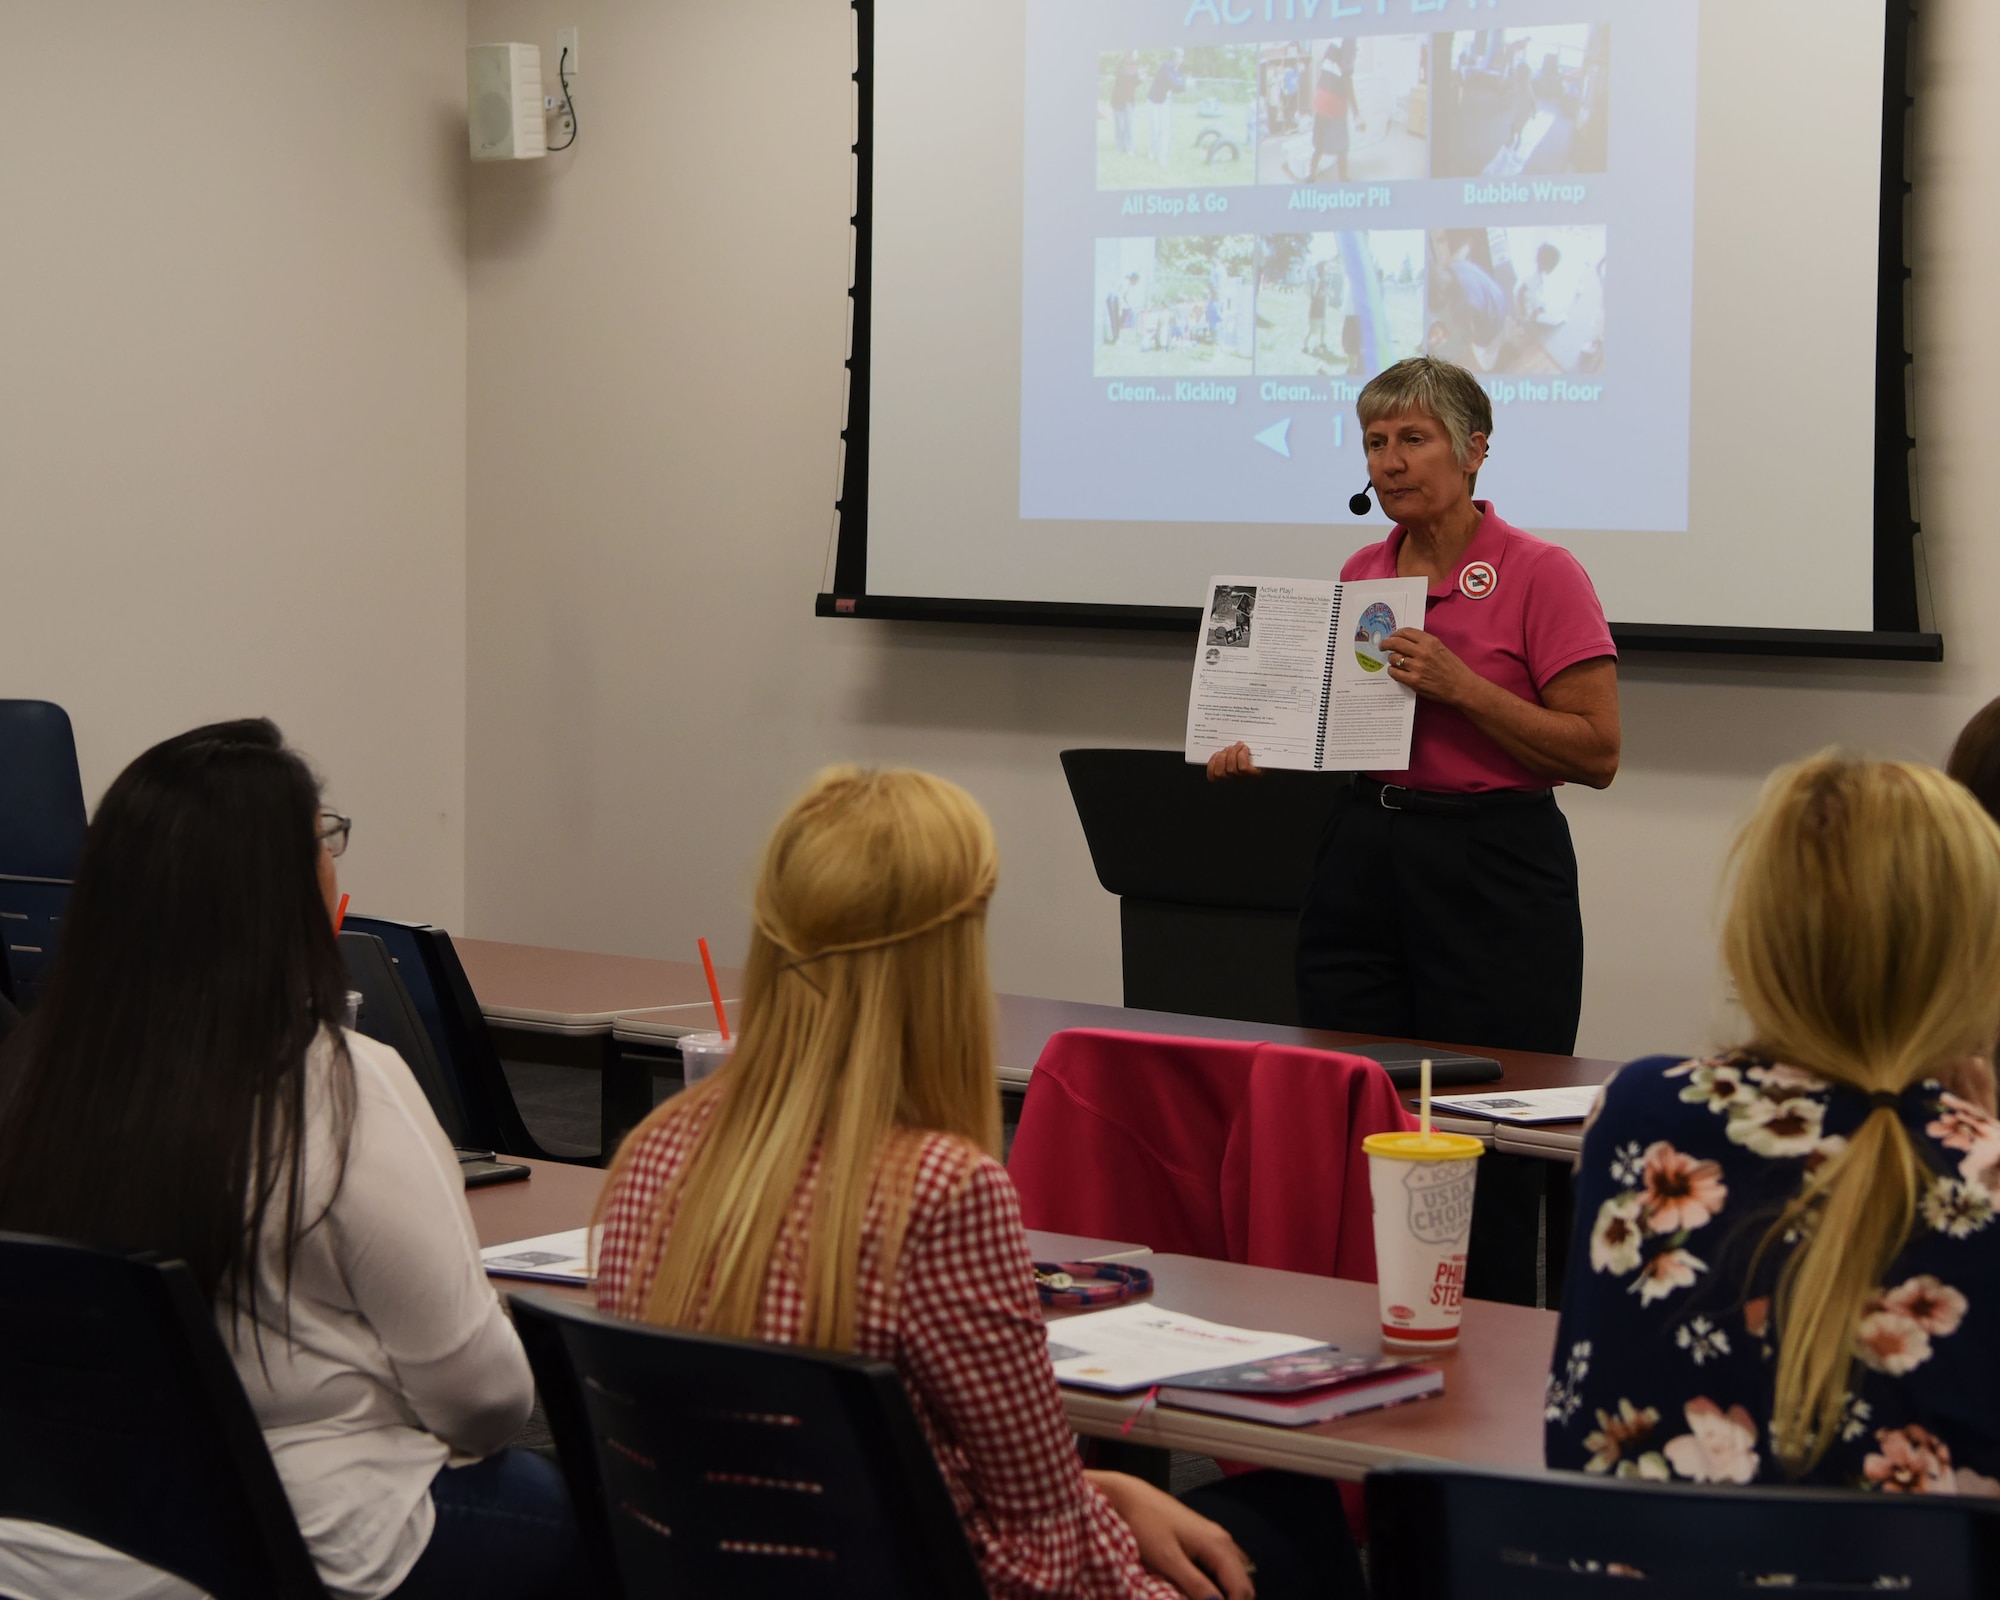 Dr. Diane H. Craft, a physical education professor, speaks about her book, ‘Active Play! Fun Physical Activities for Young Children’, during a seminar Sept. 5, 2018 at Luke Air Force Base, Ariz.